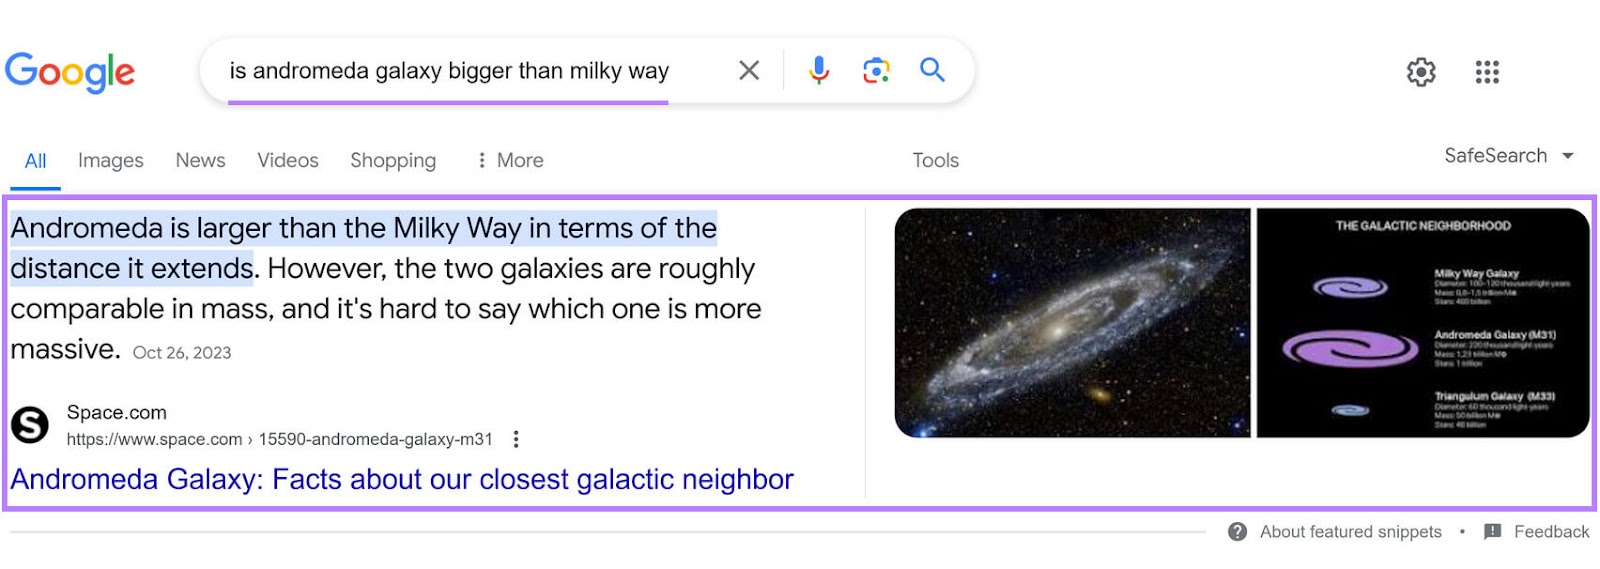 Google search results page for "is andromeda galaxy bigger than milky way" with a featured snippet that includes two images.